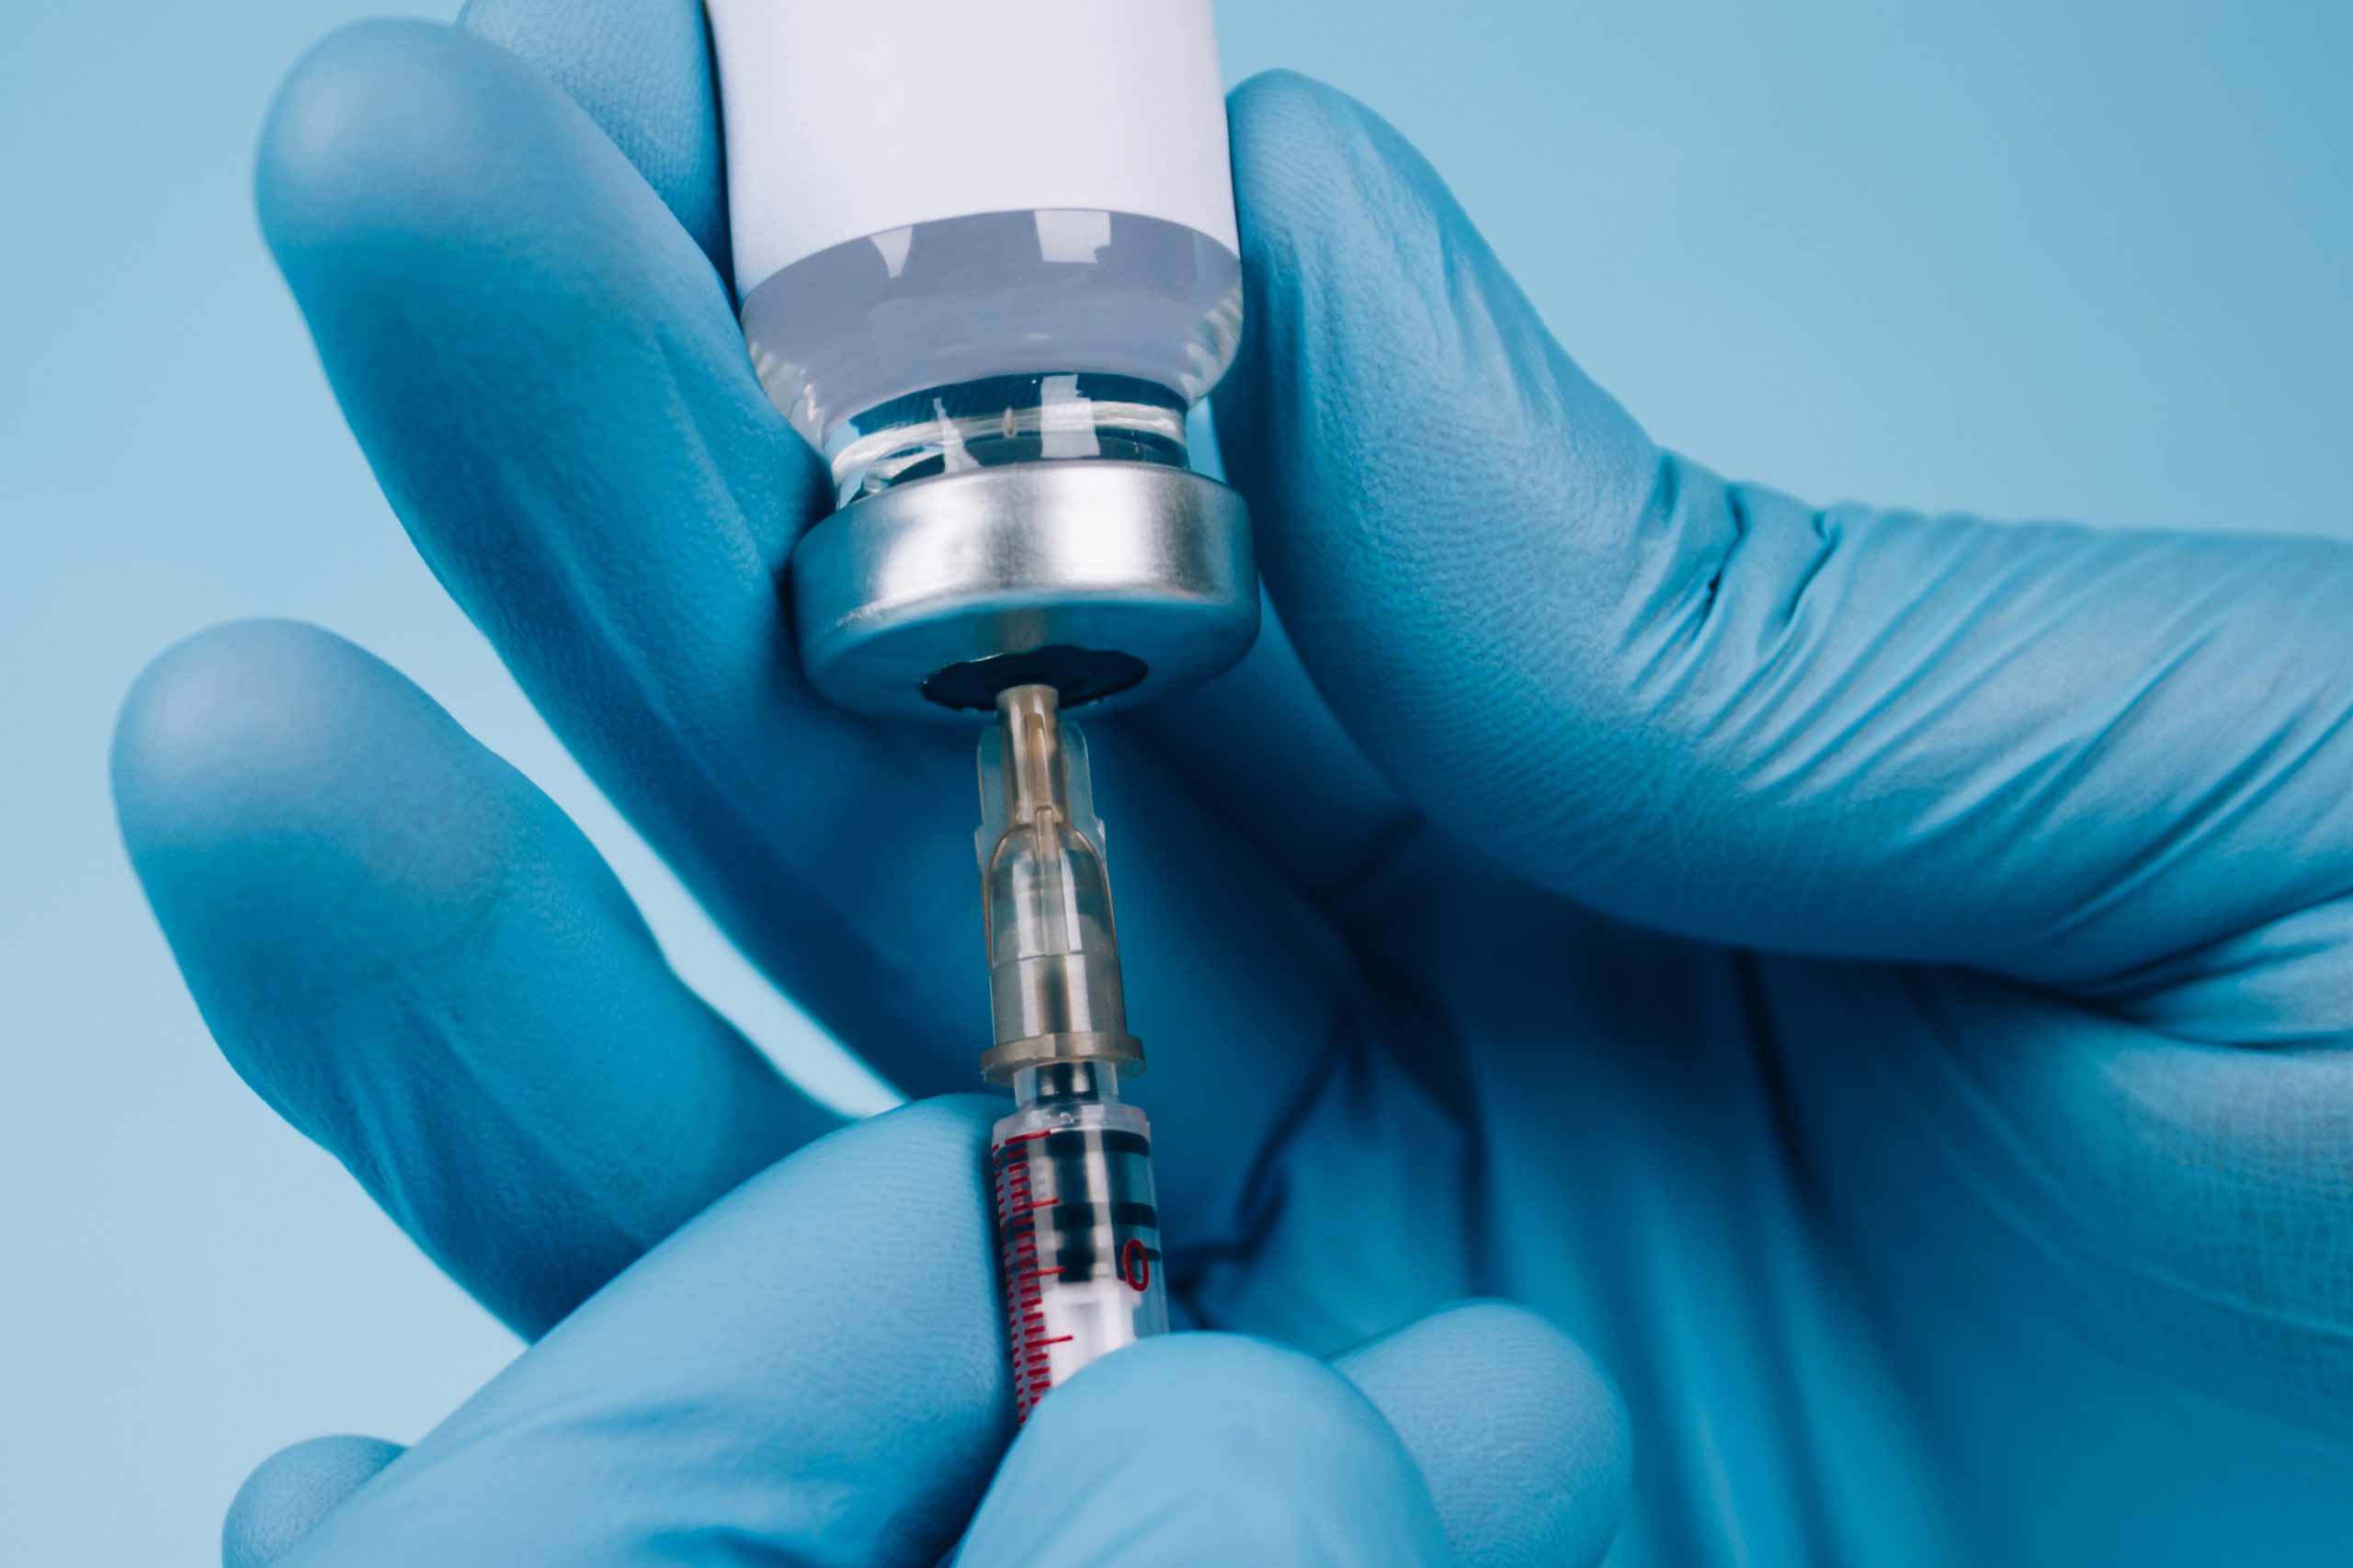 Global vaccination concept. Doctor or scientist holding vial dose of common vaccine with syringe against blue background with copy space - prevention coronavirus. Selective focus, mockup image